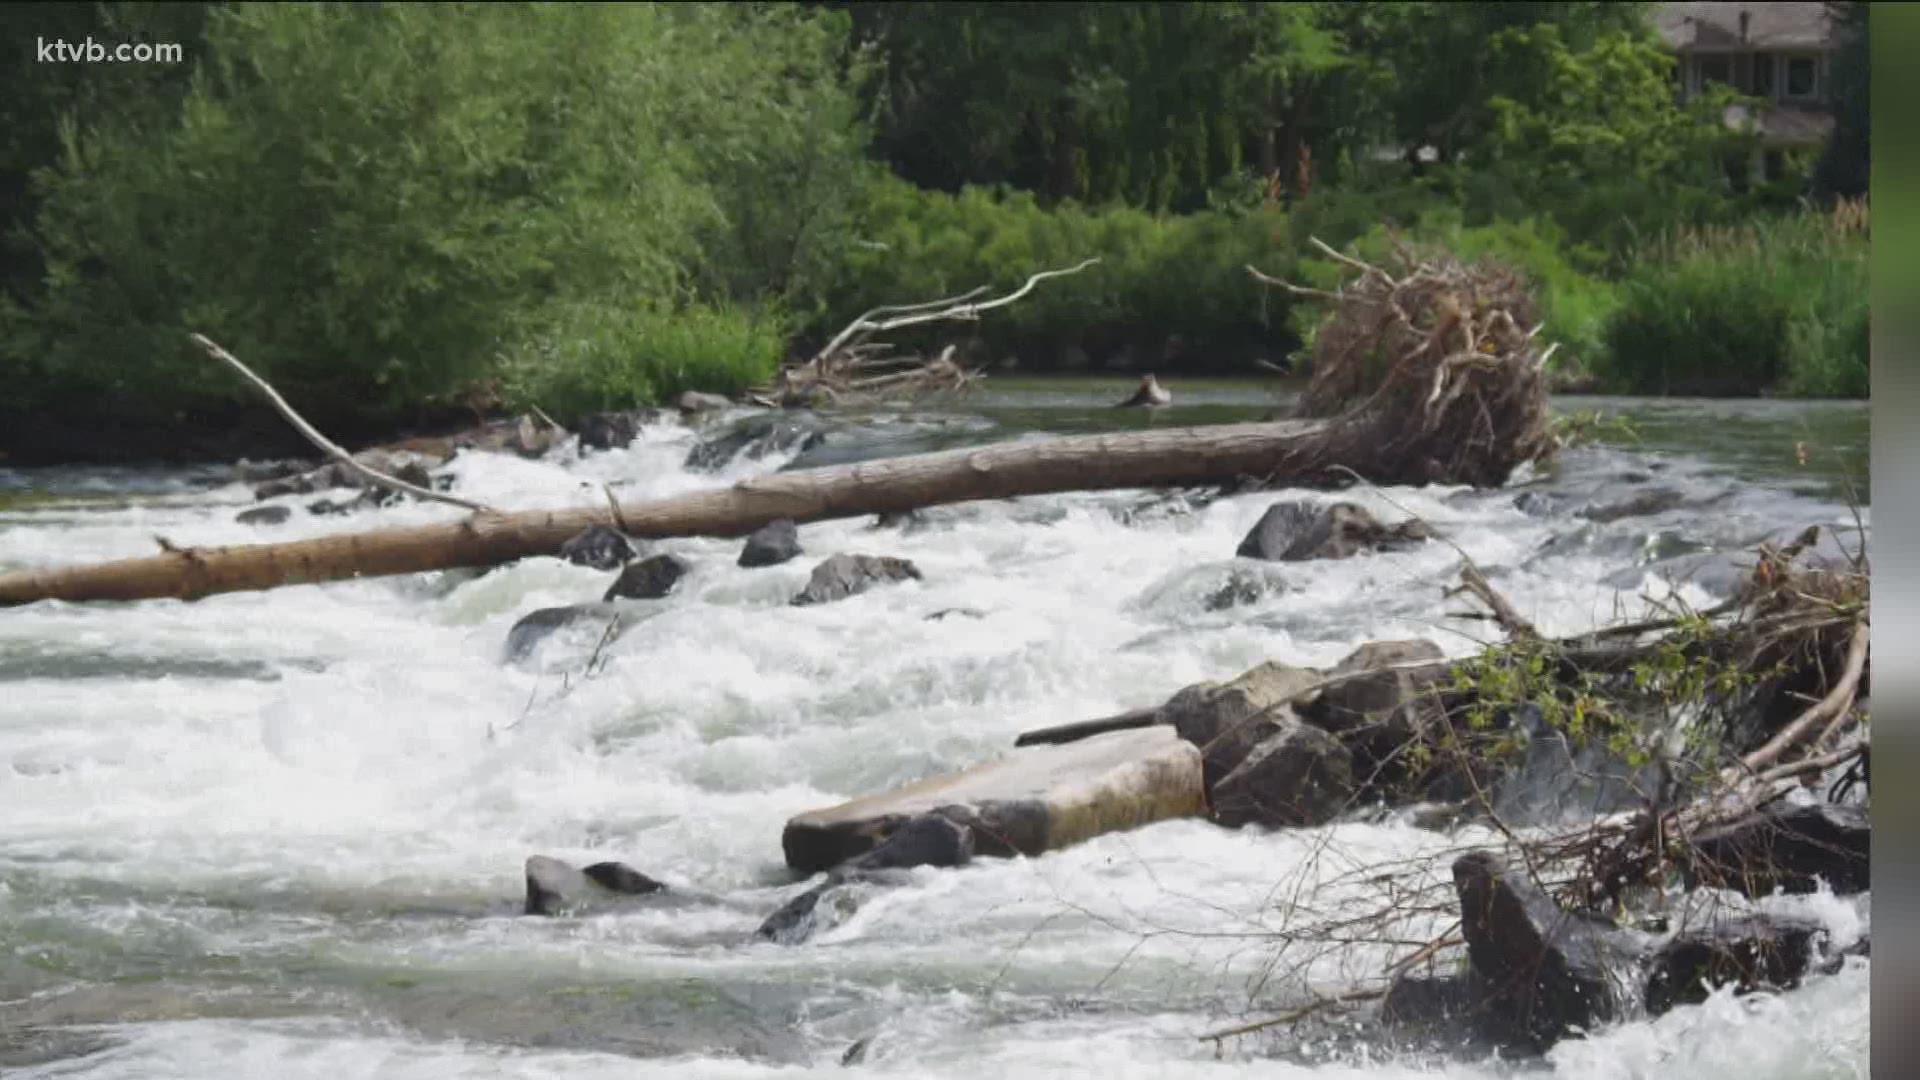 Flood district officials warn people that floating some of the non-traditional areas could lead to getting hurt by trees, sharp objects or irrigation diversions.